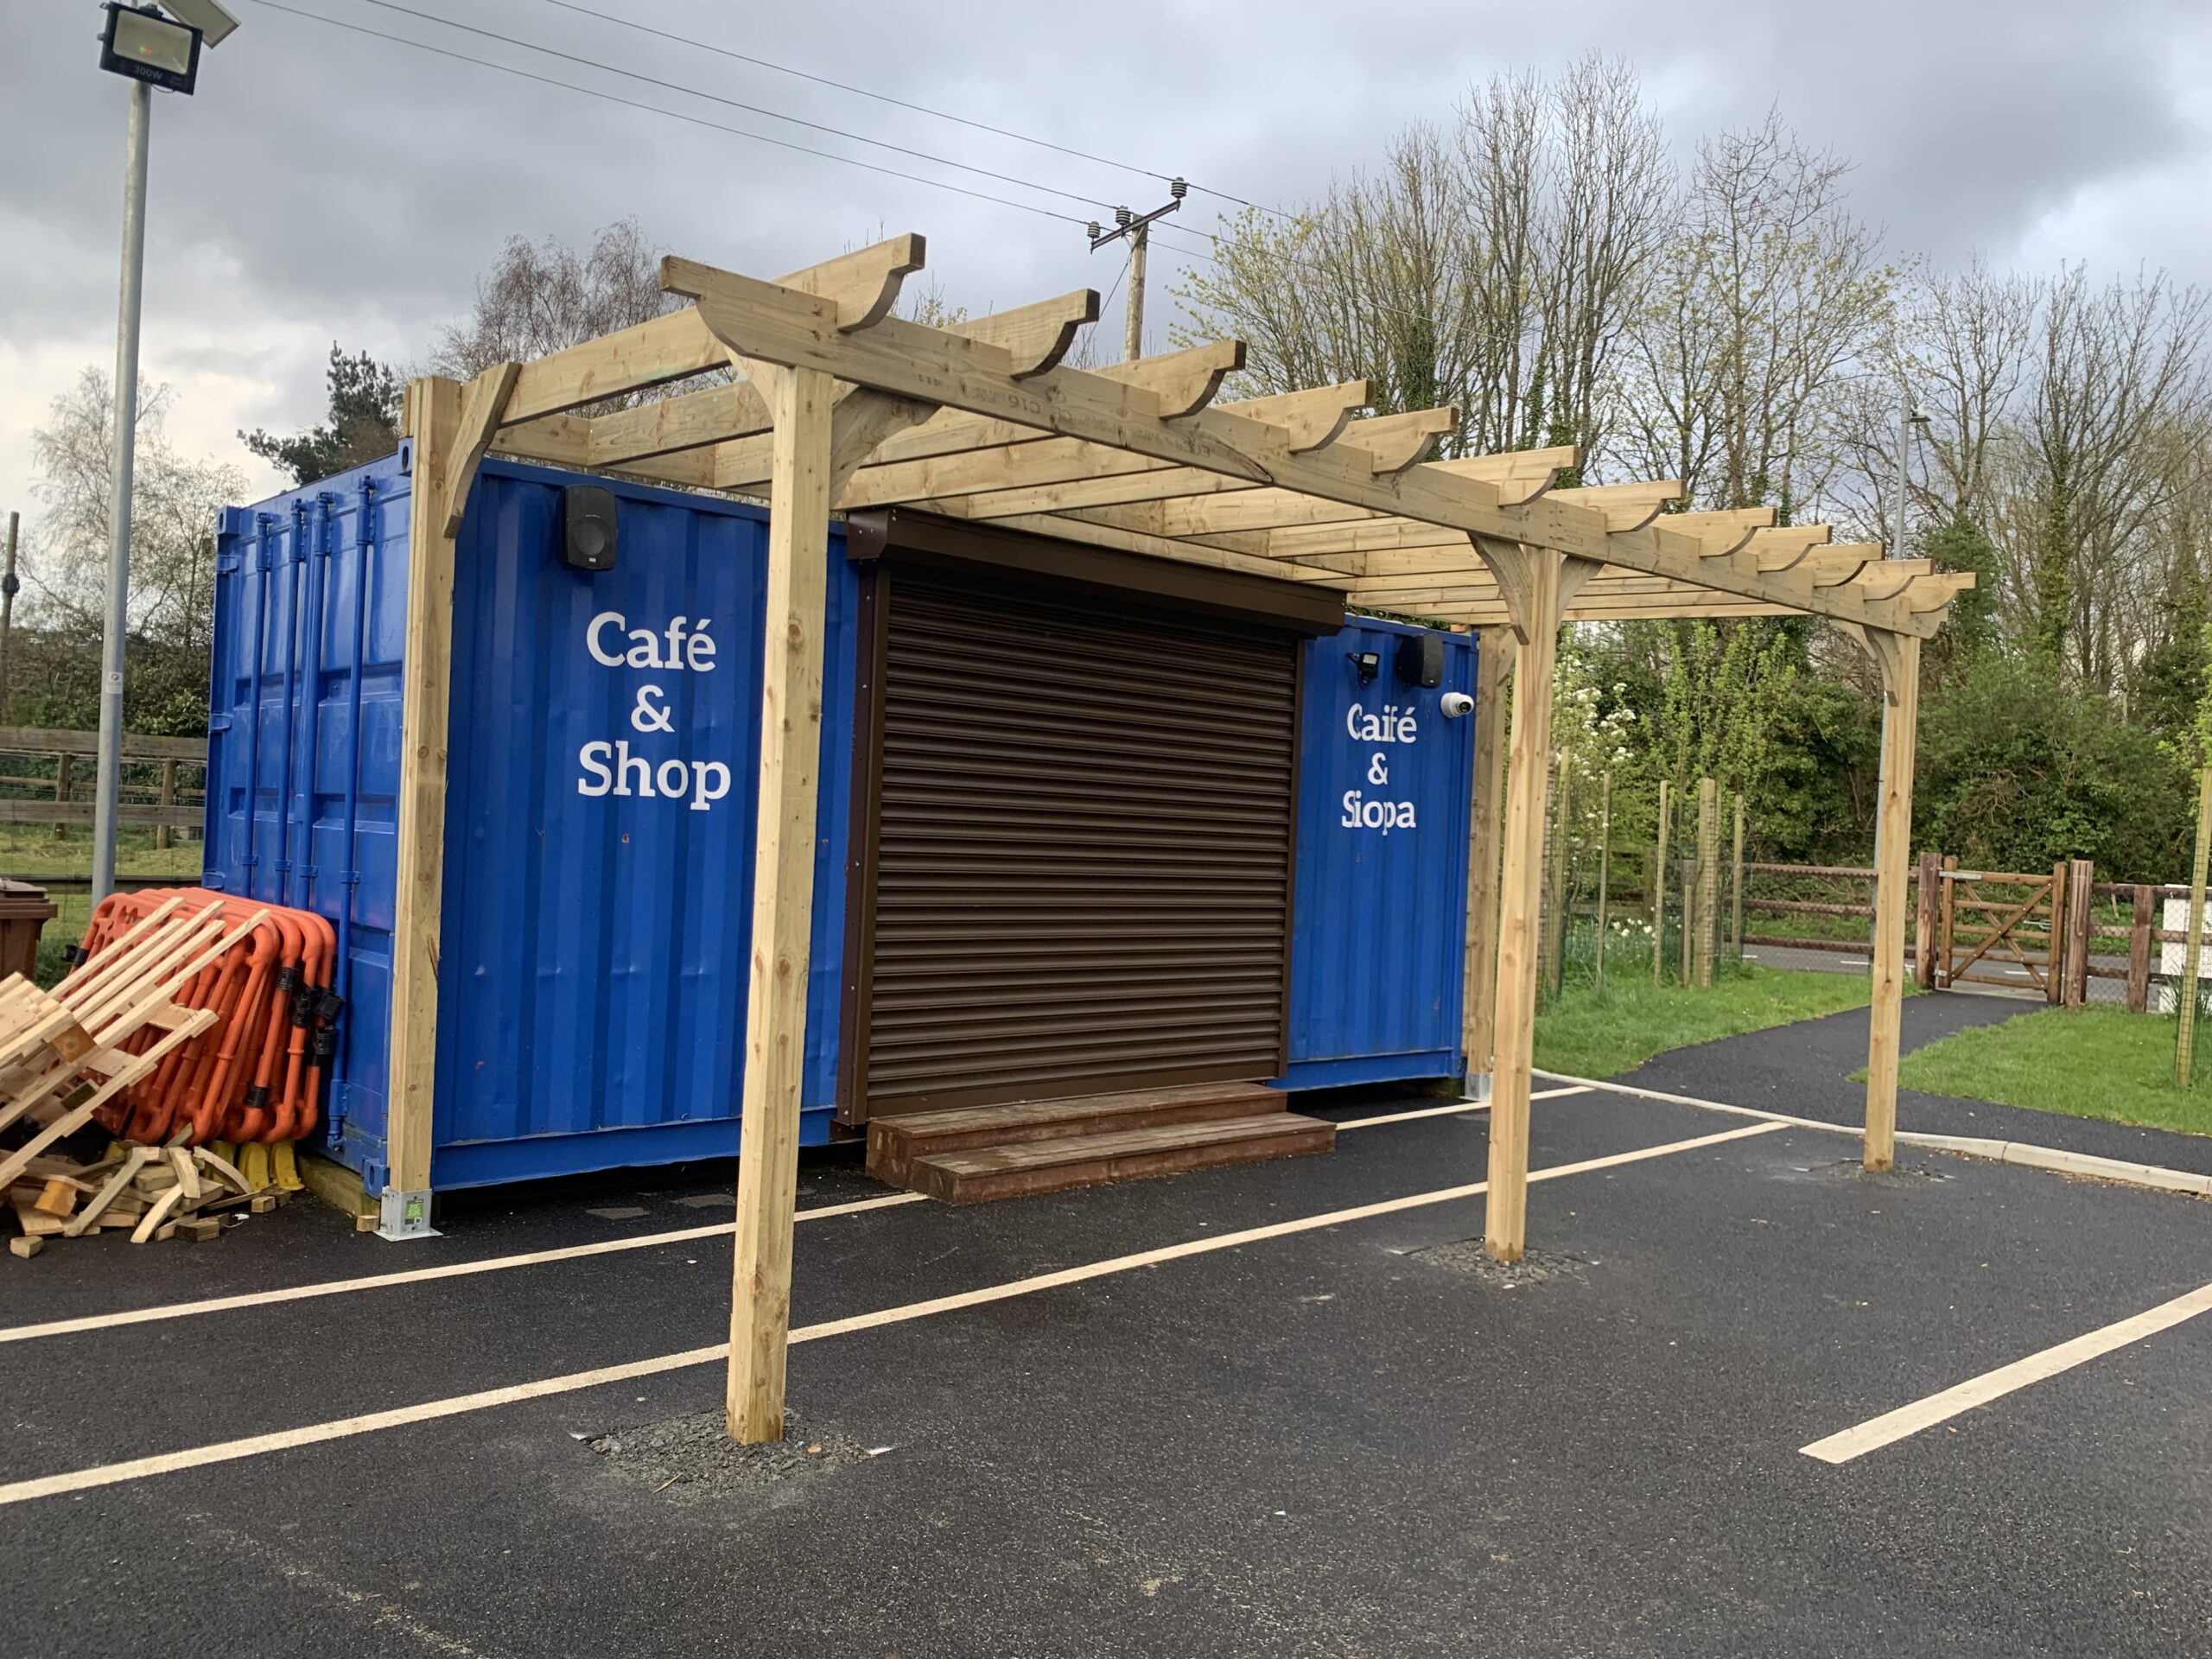 Cafe and Shop Outdoor Extension project by Conor Henderick…well done Conor, looks amazing…day two work tomorrow